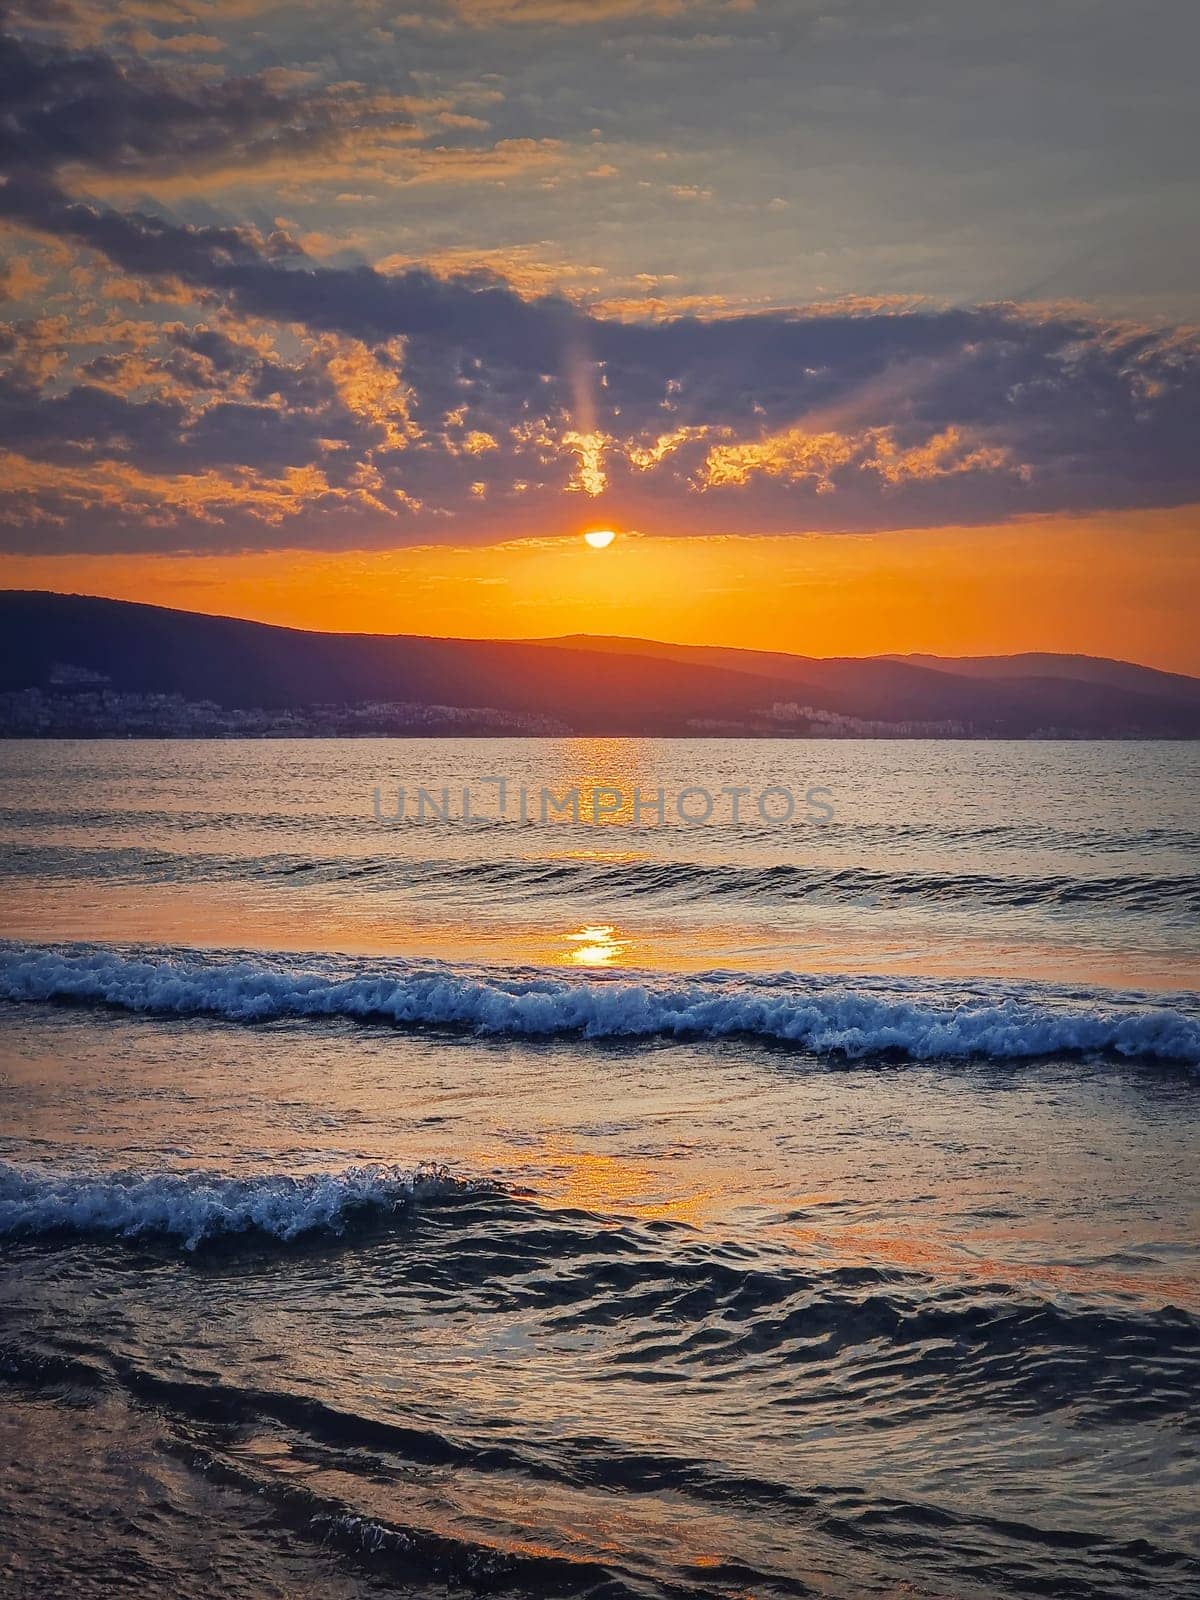 Vibrant sunrise at the Bulgarian coastline of Black Sea. Sunny beach resort, dawn scene with the sun rising up the hills on the horizon and foamy waves washing the sand shore